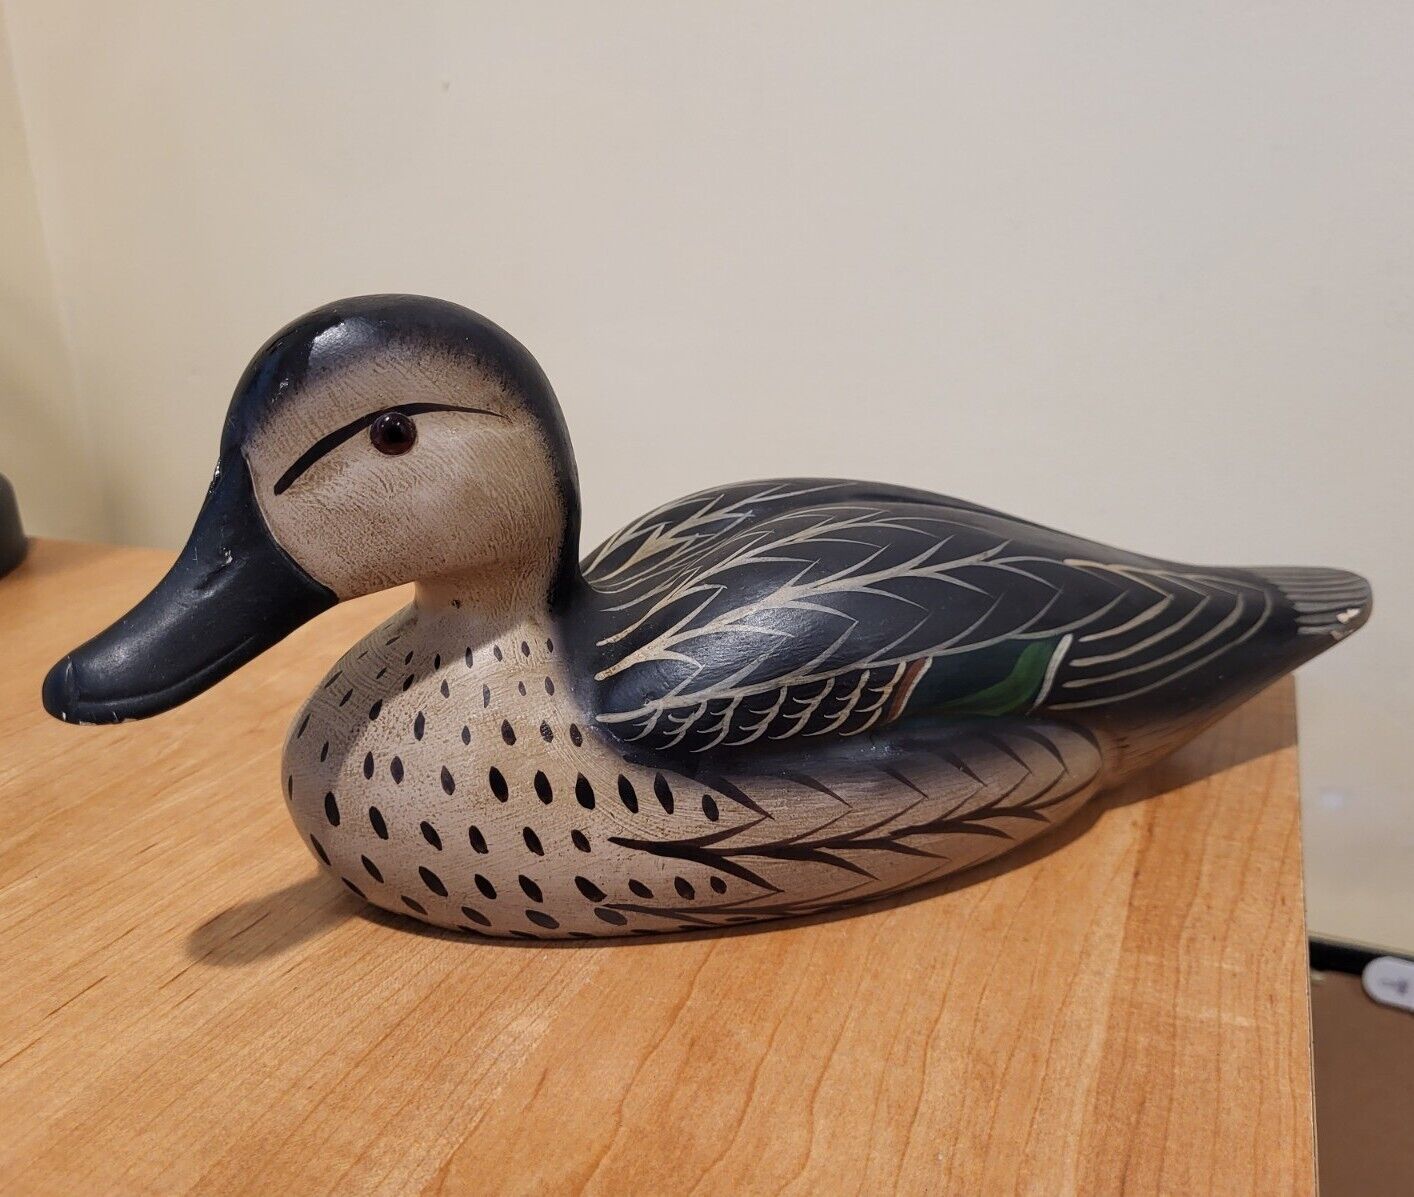 BOYDS COLLECTION   Green Wing Teal  Duck   SIGNED J. WEAVER  1982-87  Home Decor